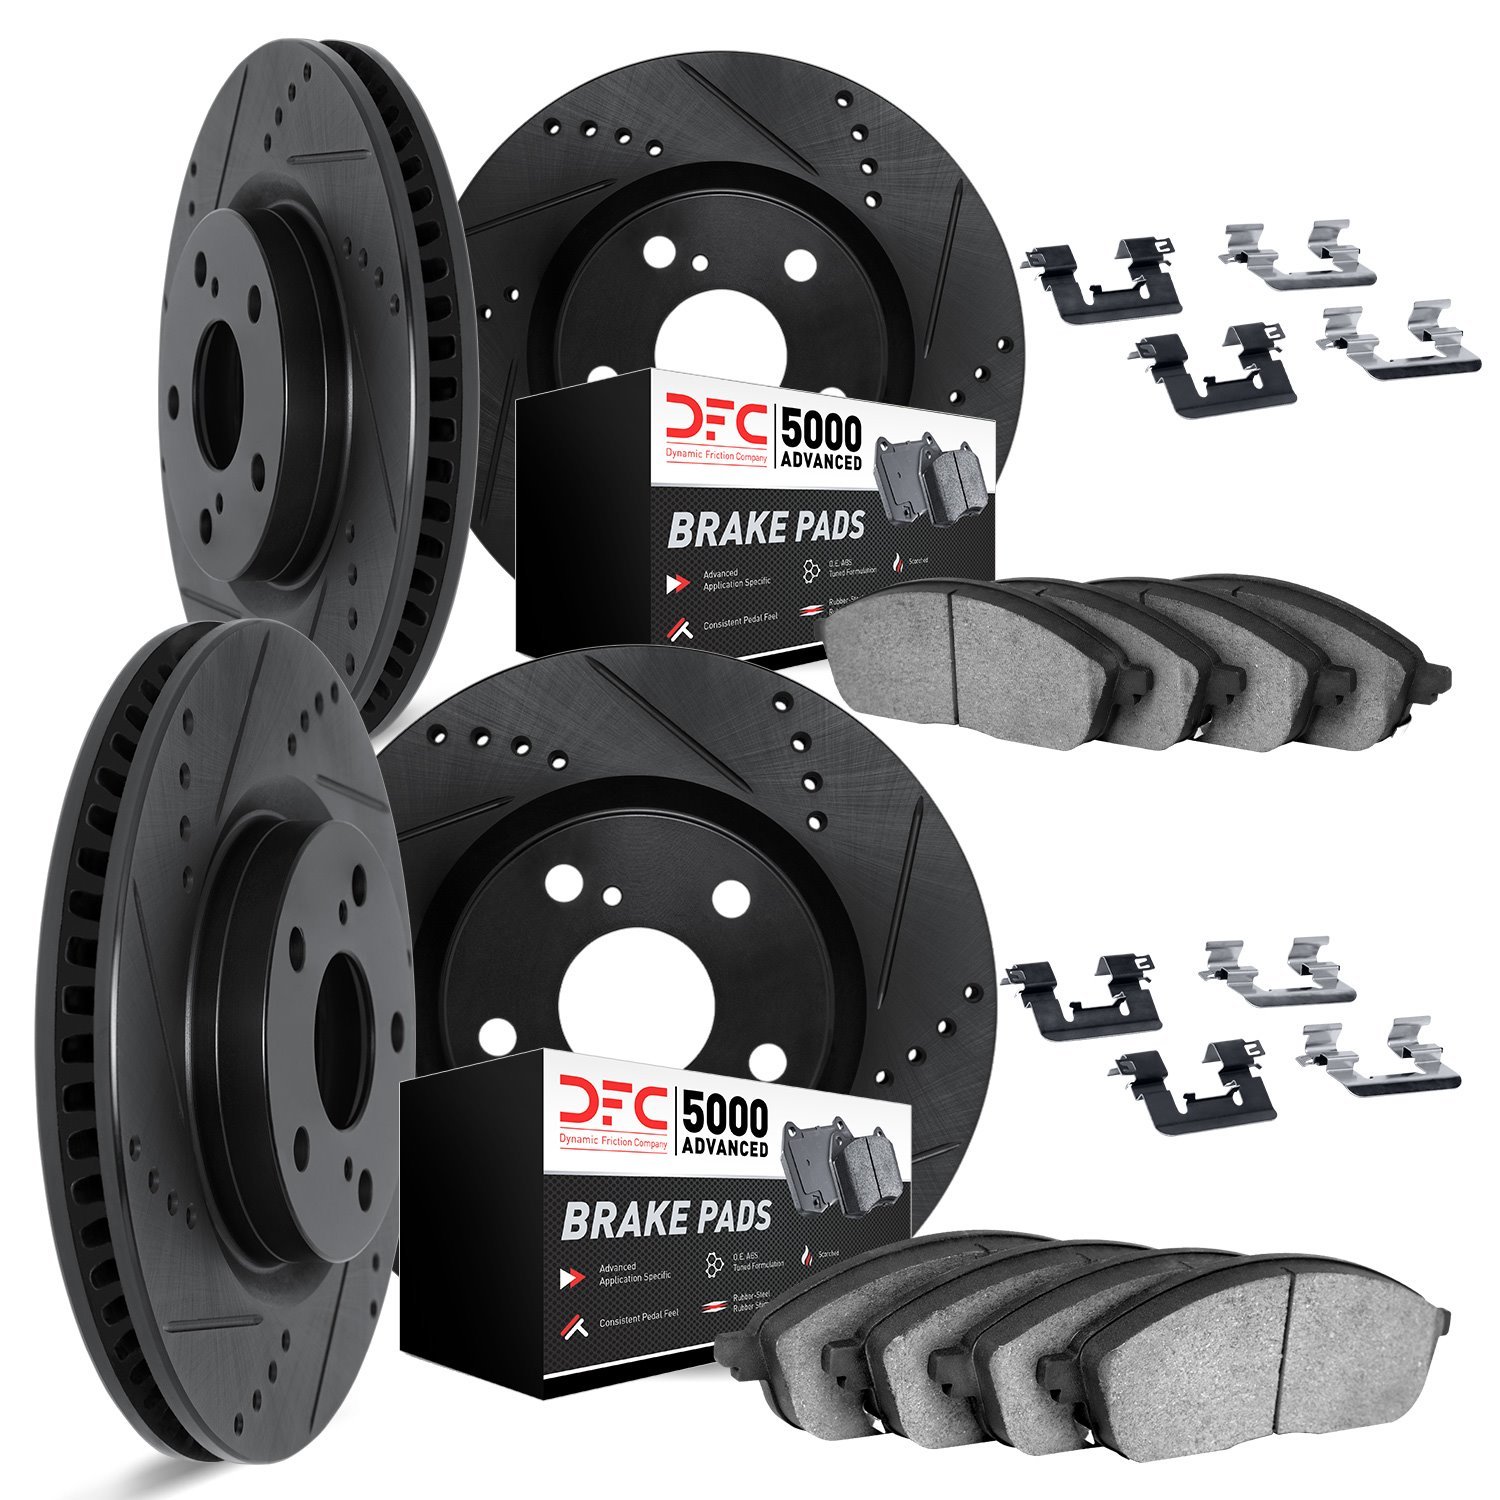 8514-13019 Drilled/Slotted Brake Rotors w/5000 Advanced Brake Pads Kit & Hardware [Black], Fits Select Subaru, Position: Front a